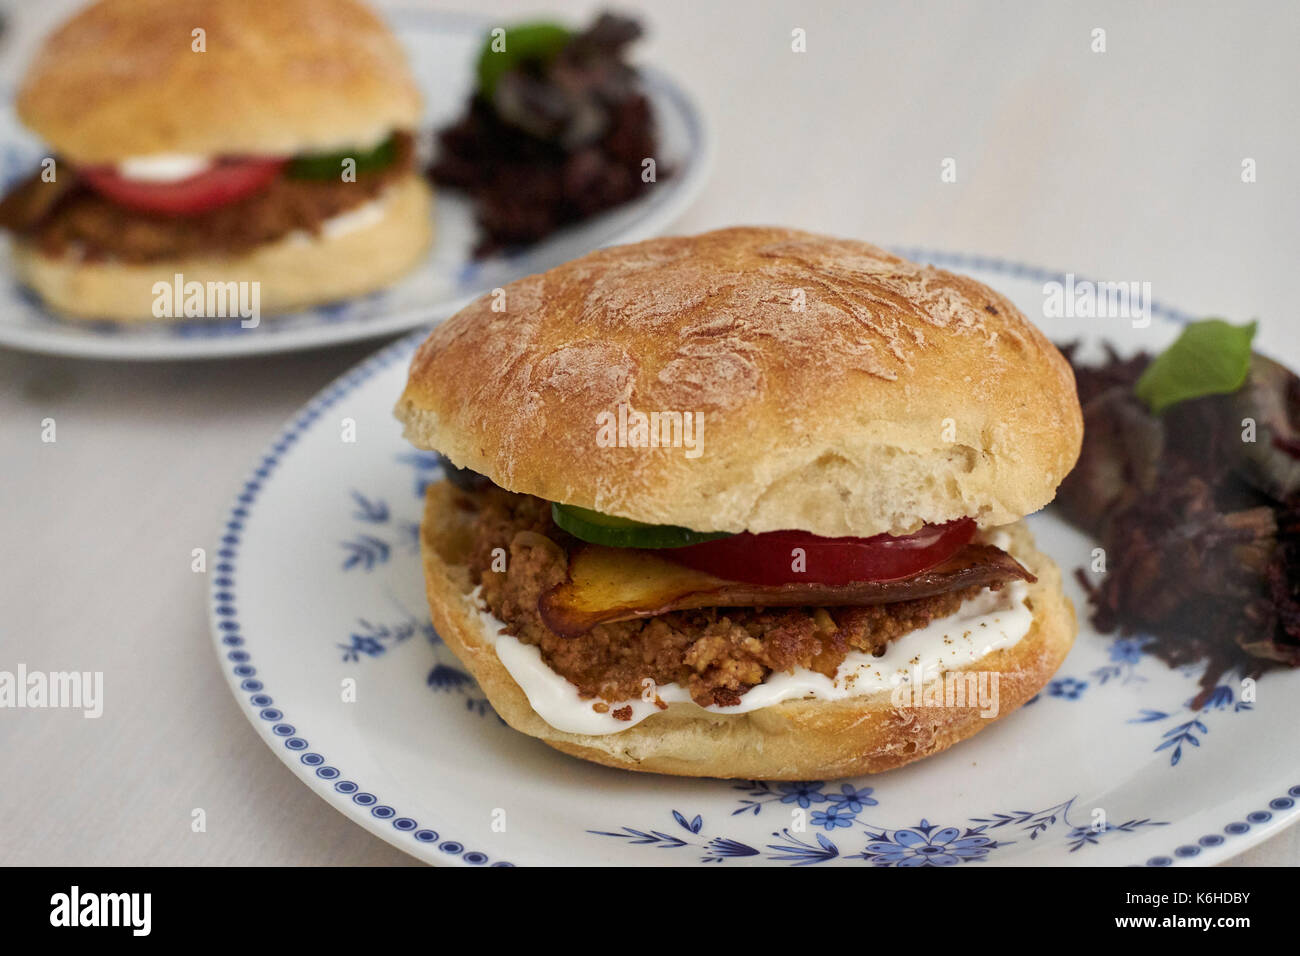 Two vegan burgers with paprika and tofu on plates Stock Photo